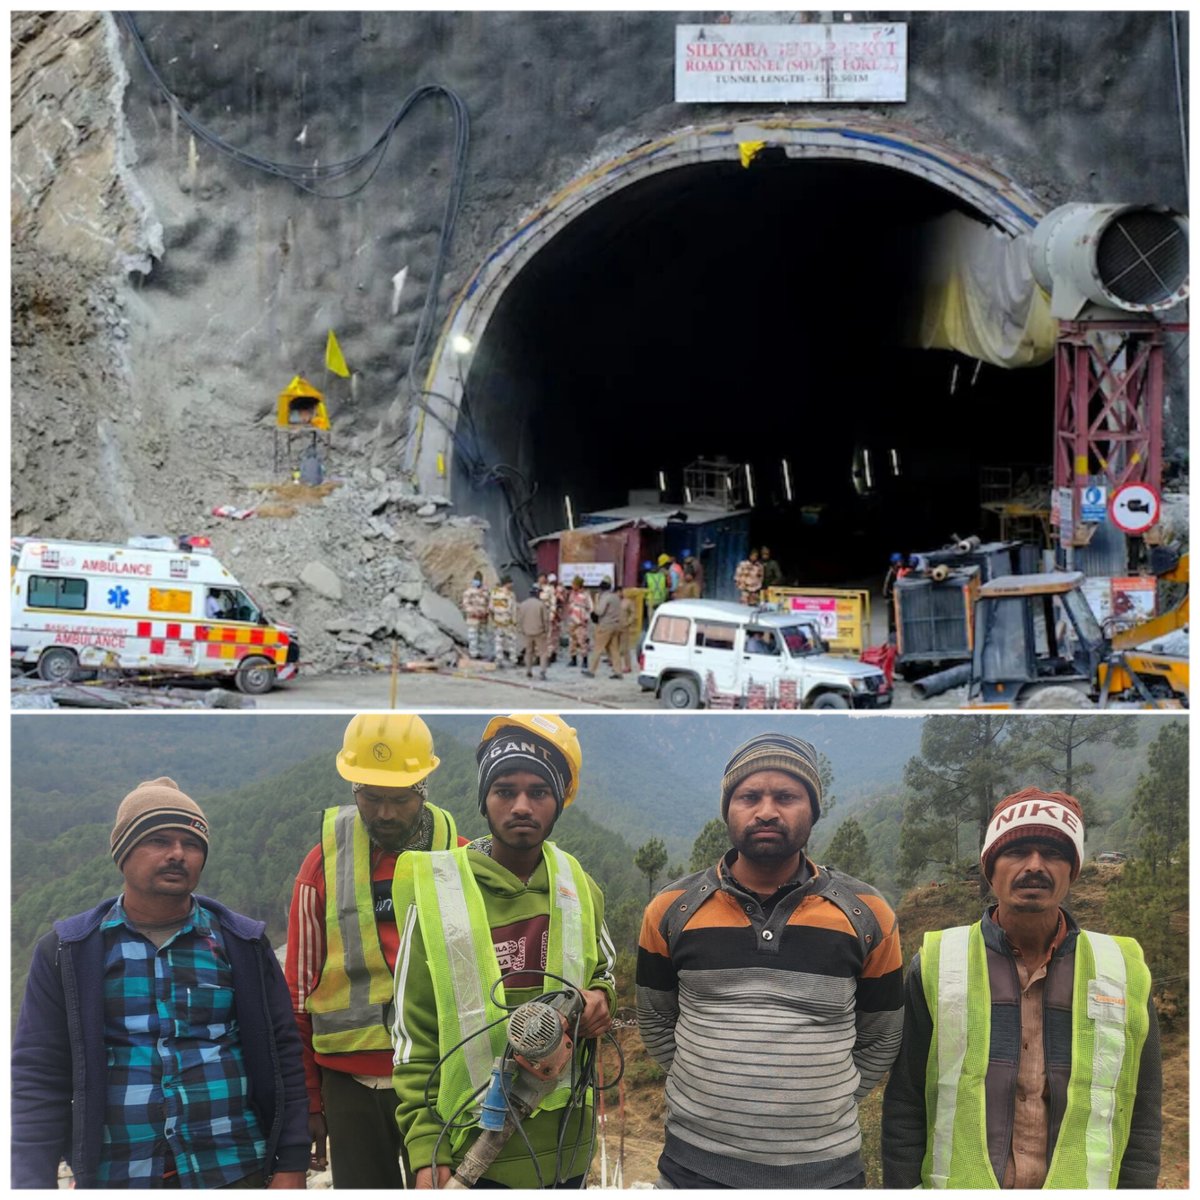 Just 3 metres left to rescue 41 workers trapped in collapsed #Uttarkashi tunnel. Team of 12 rat-hole miners drilling manually through rubble. Race against time.
Read more details on shorts91.com/category/india

#UttarkashiTunnelRescue #UttarkashiRescue #RatHoleMiners #TrappedWorkers